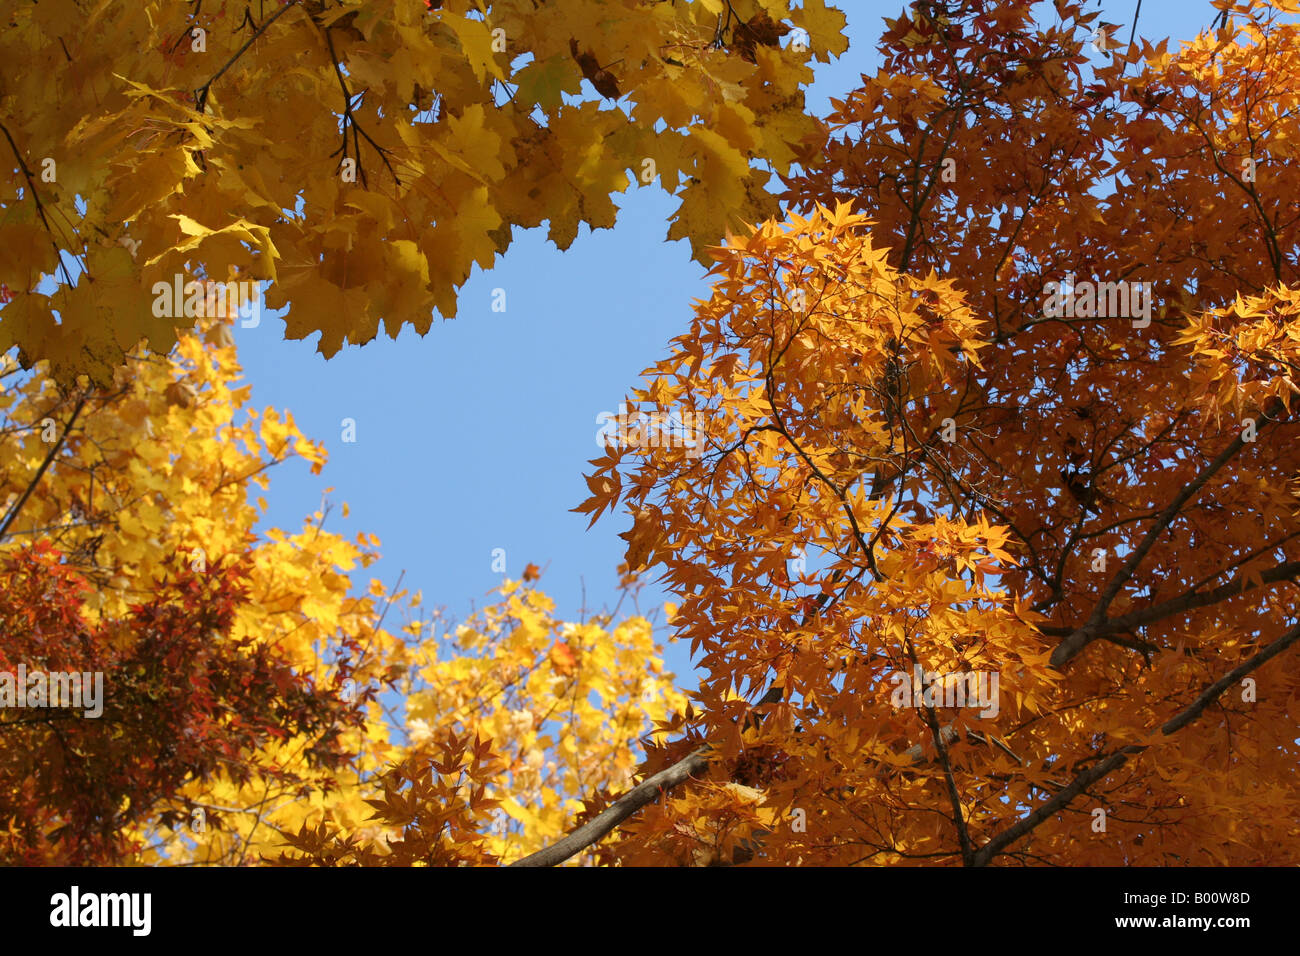 Yellow leaves of Norway maple (Acer platanoides) and orange leaves of Japanese maple (Acer palmatum) against a blue sky. Stock Photo